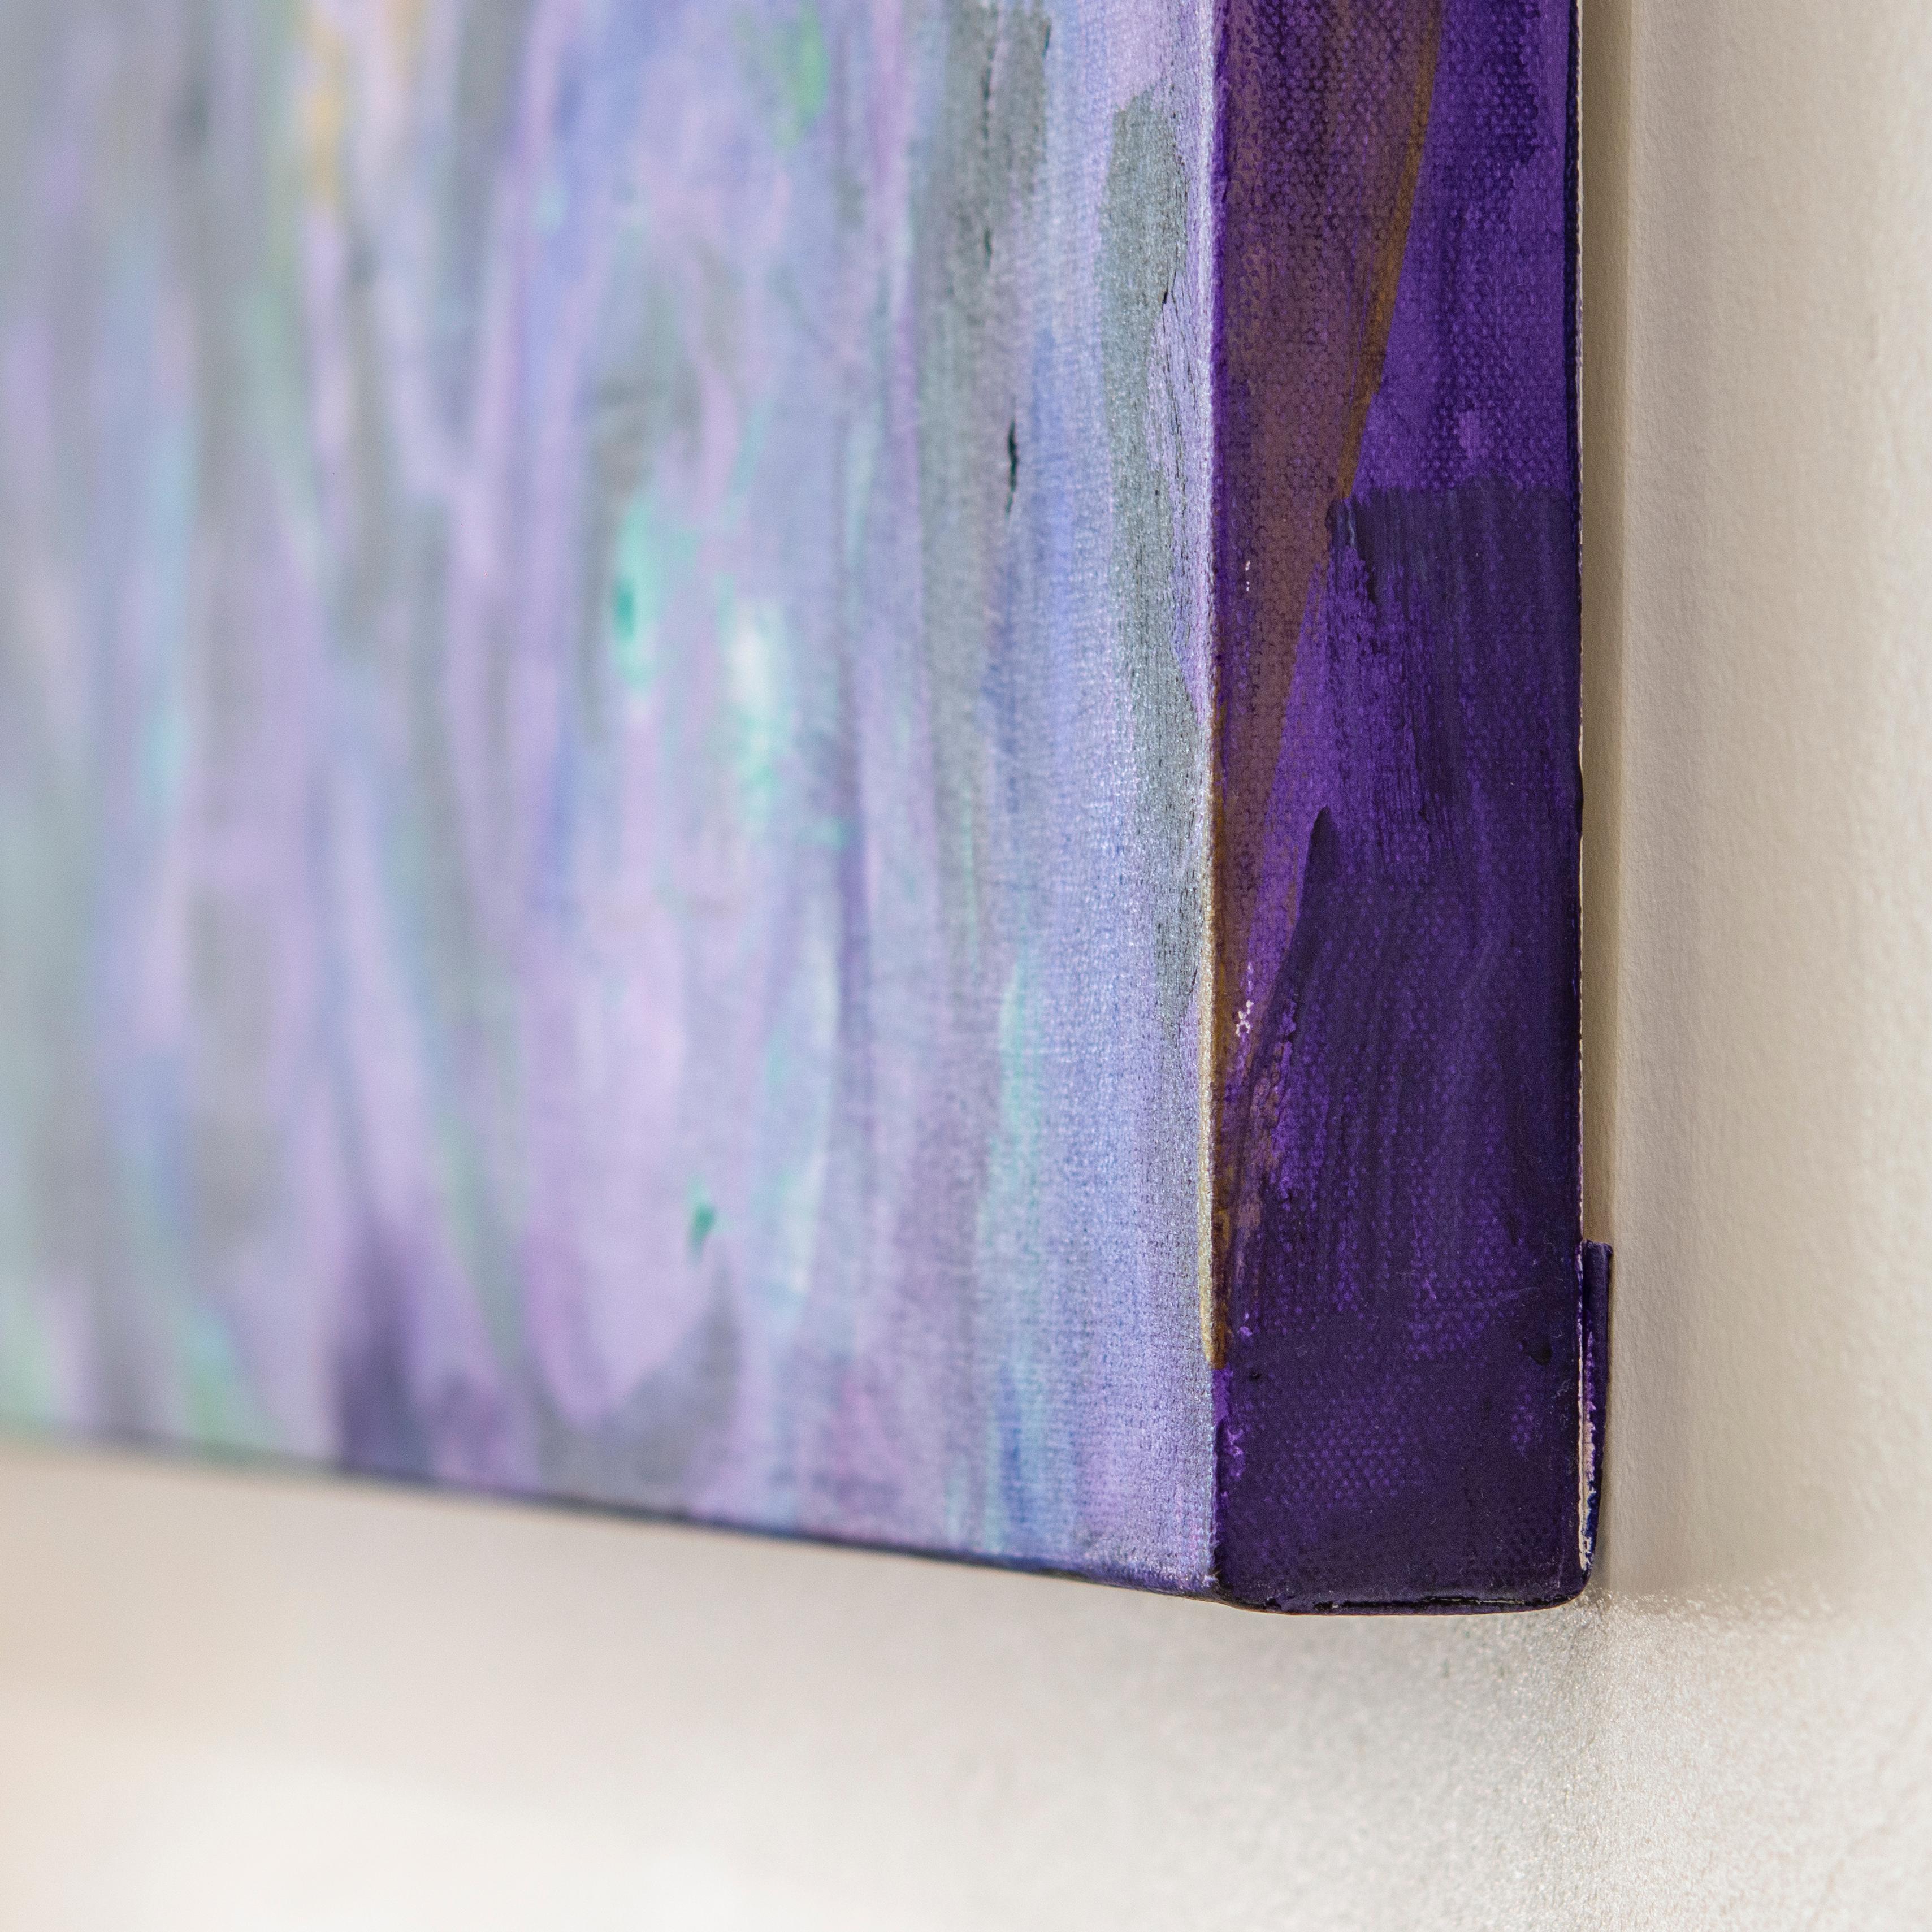 'Ode to Joan Mitchell' Wrapped Canvas Original Painting features an energetic abstract aesthetic in vibrant tones of purple, blue, green, yellow, and brown. Modern divinity expressed on canvas, Karen H. Salup’s work exhibits a multitude of textures